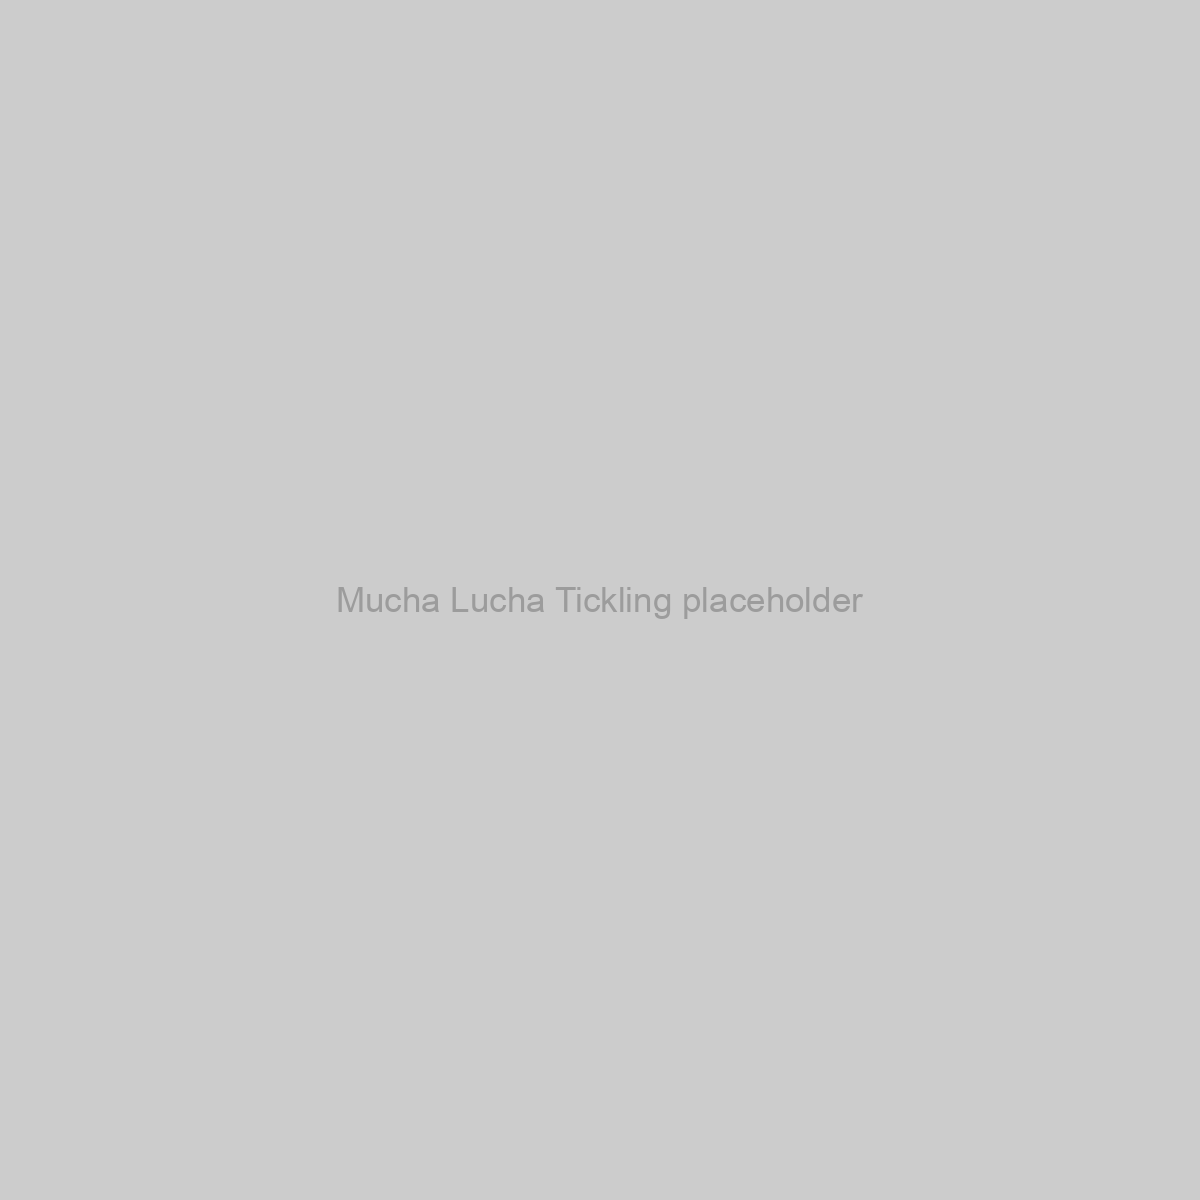 Mucha Lucha Tickling Placeholder Image